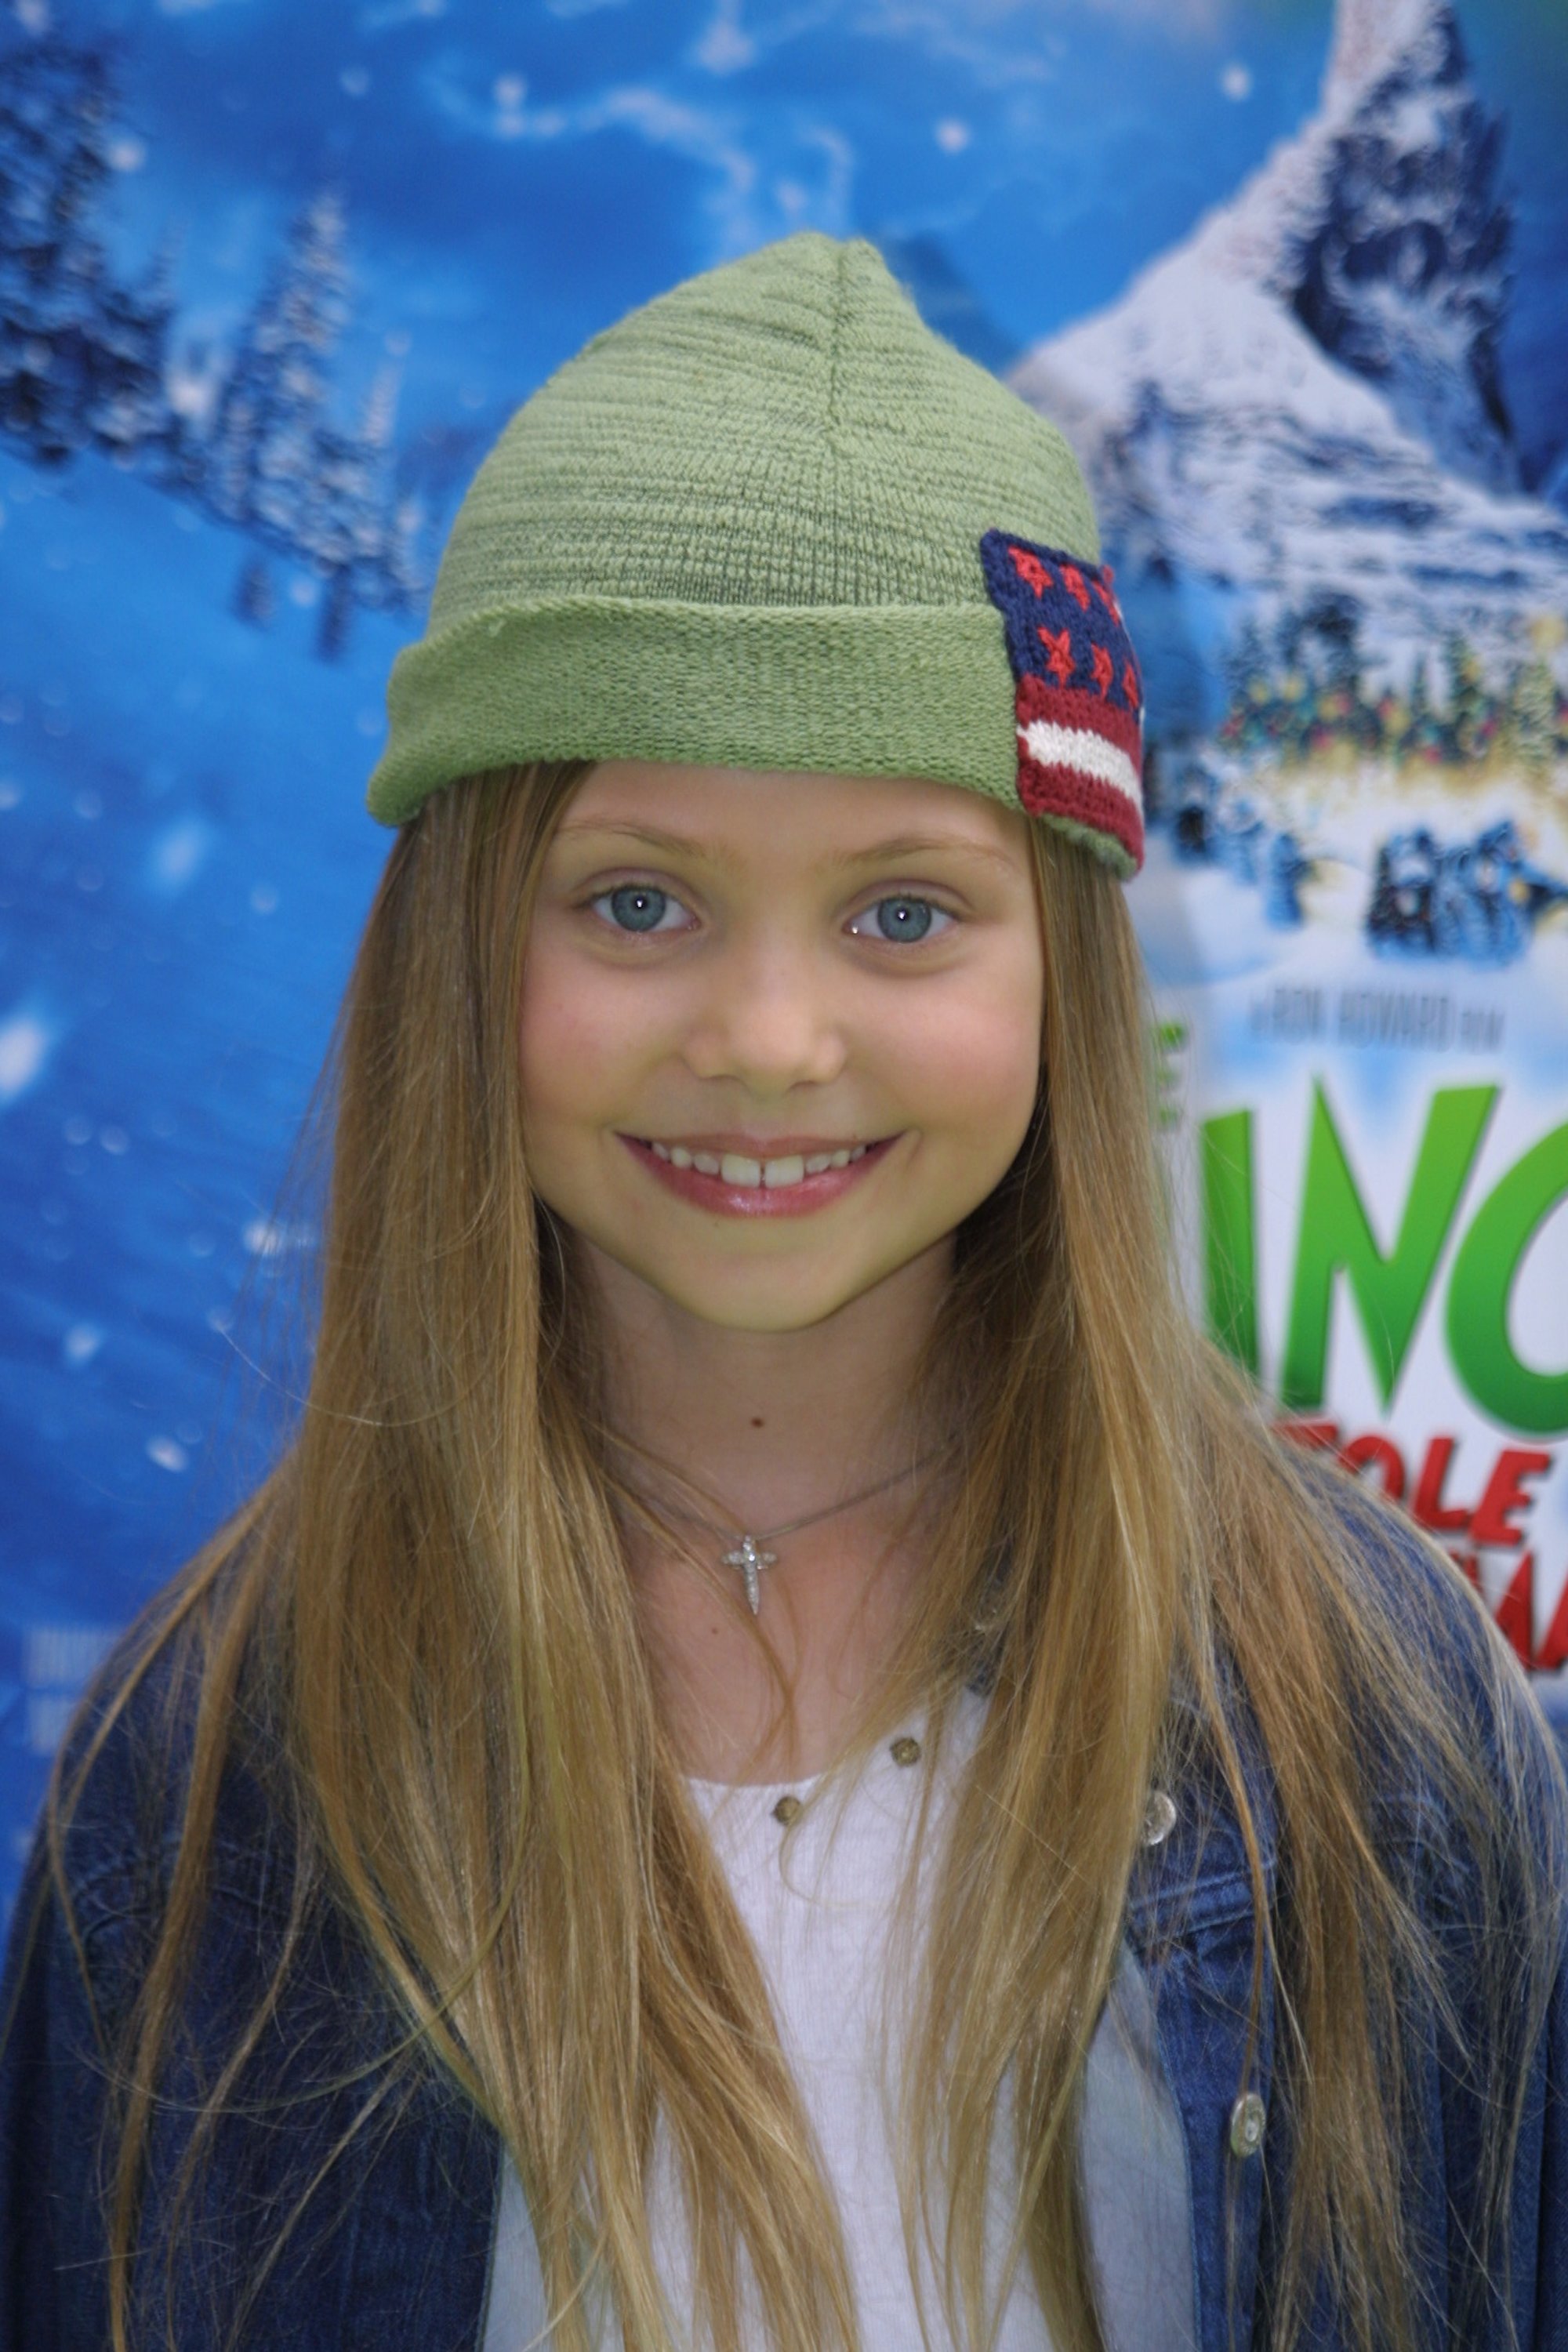 Taylor Momsen at a celebration of the VHS/DVD launch of "How The Grinch Stole Christmas" as well as the "The Grinch's Heart Just Got Bigger/Toys For Tots" charity campaign on November 17, 2001 in Hollywood, California | Source: Getty Images